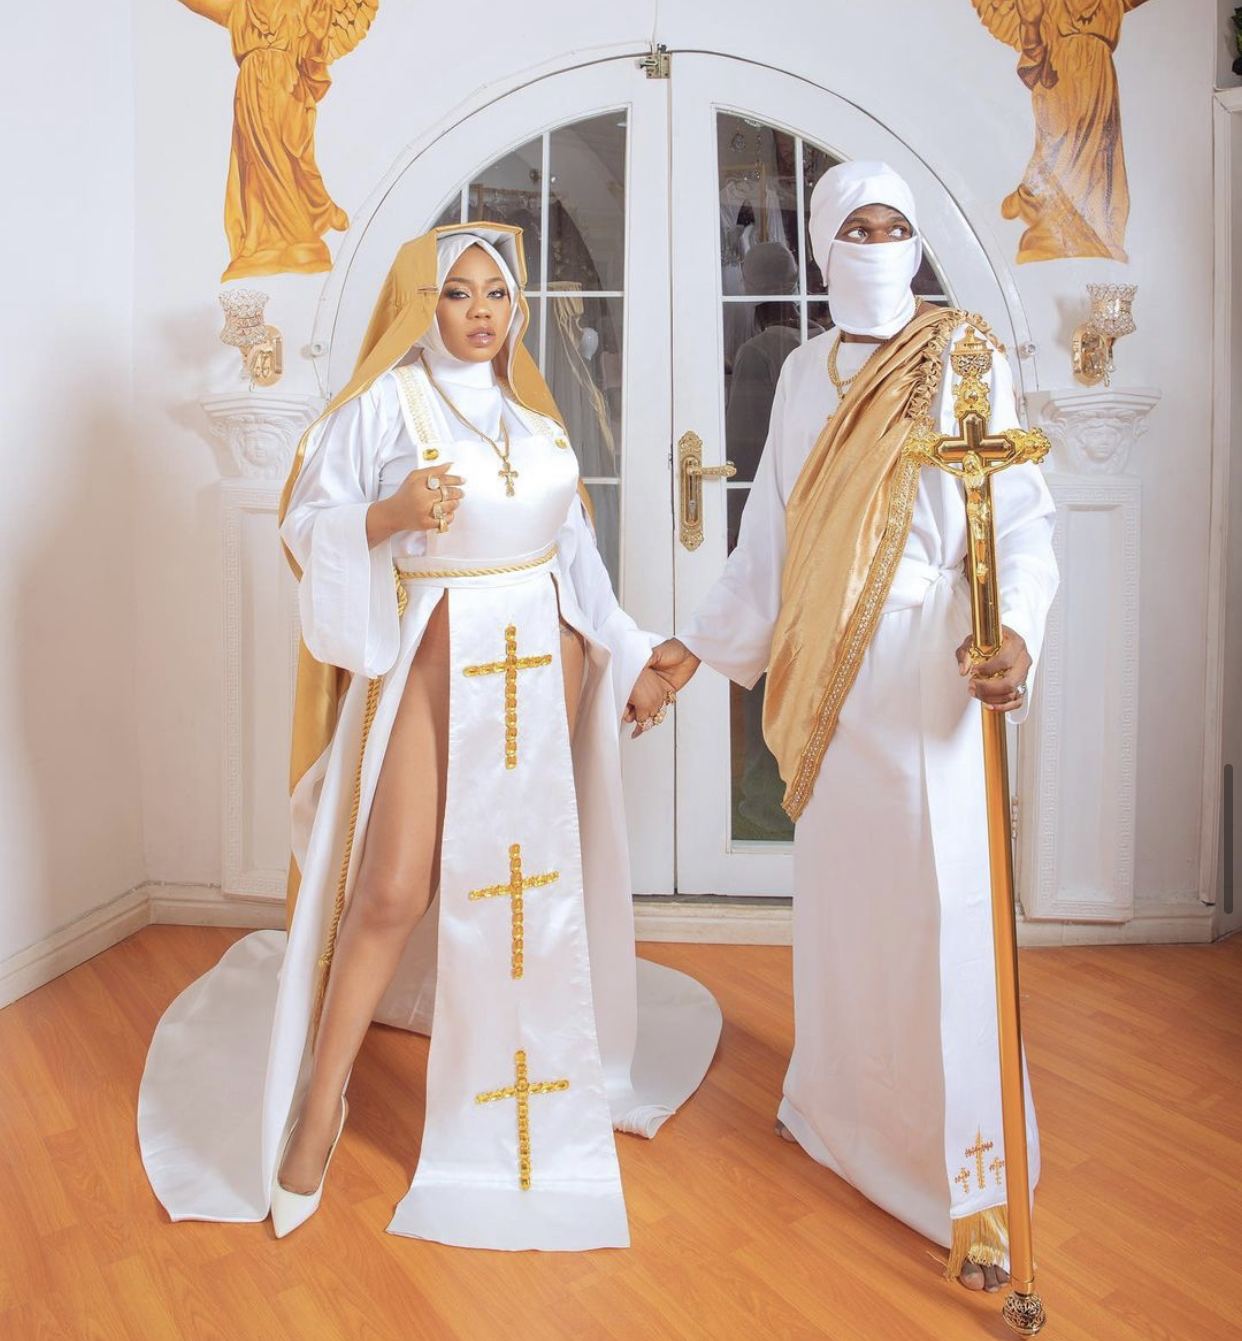 Toyin Lawani and a man in their controversial nun outfit